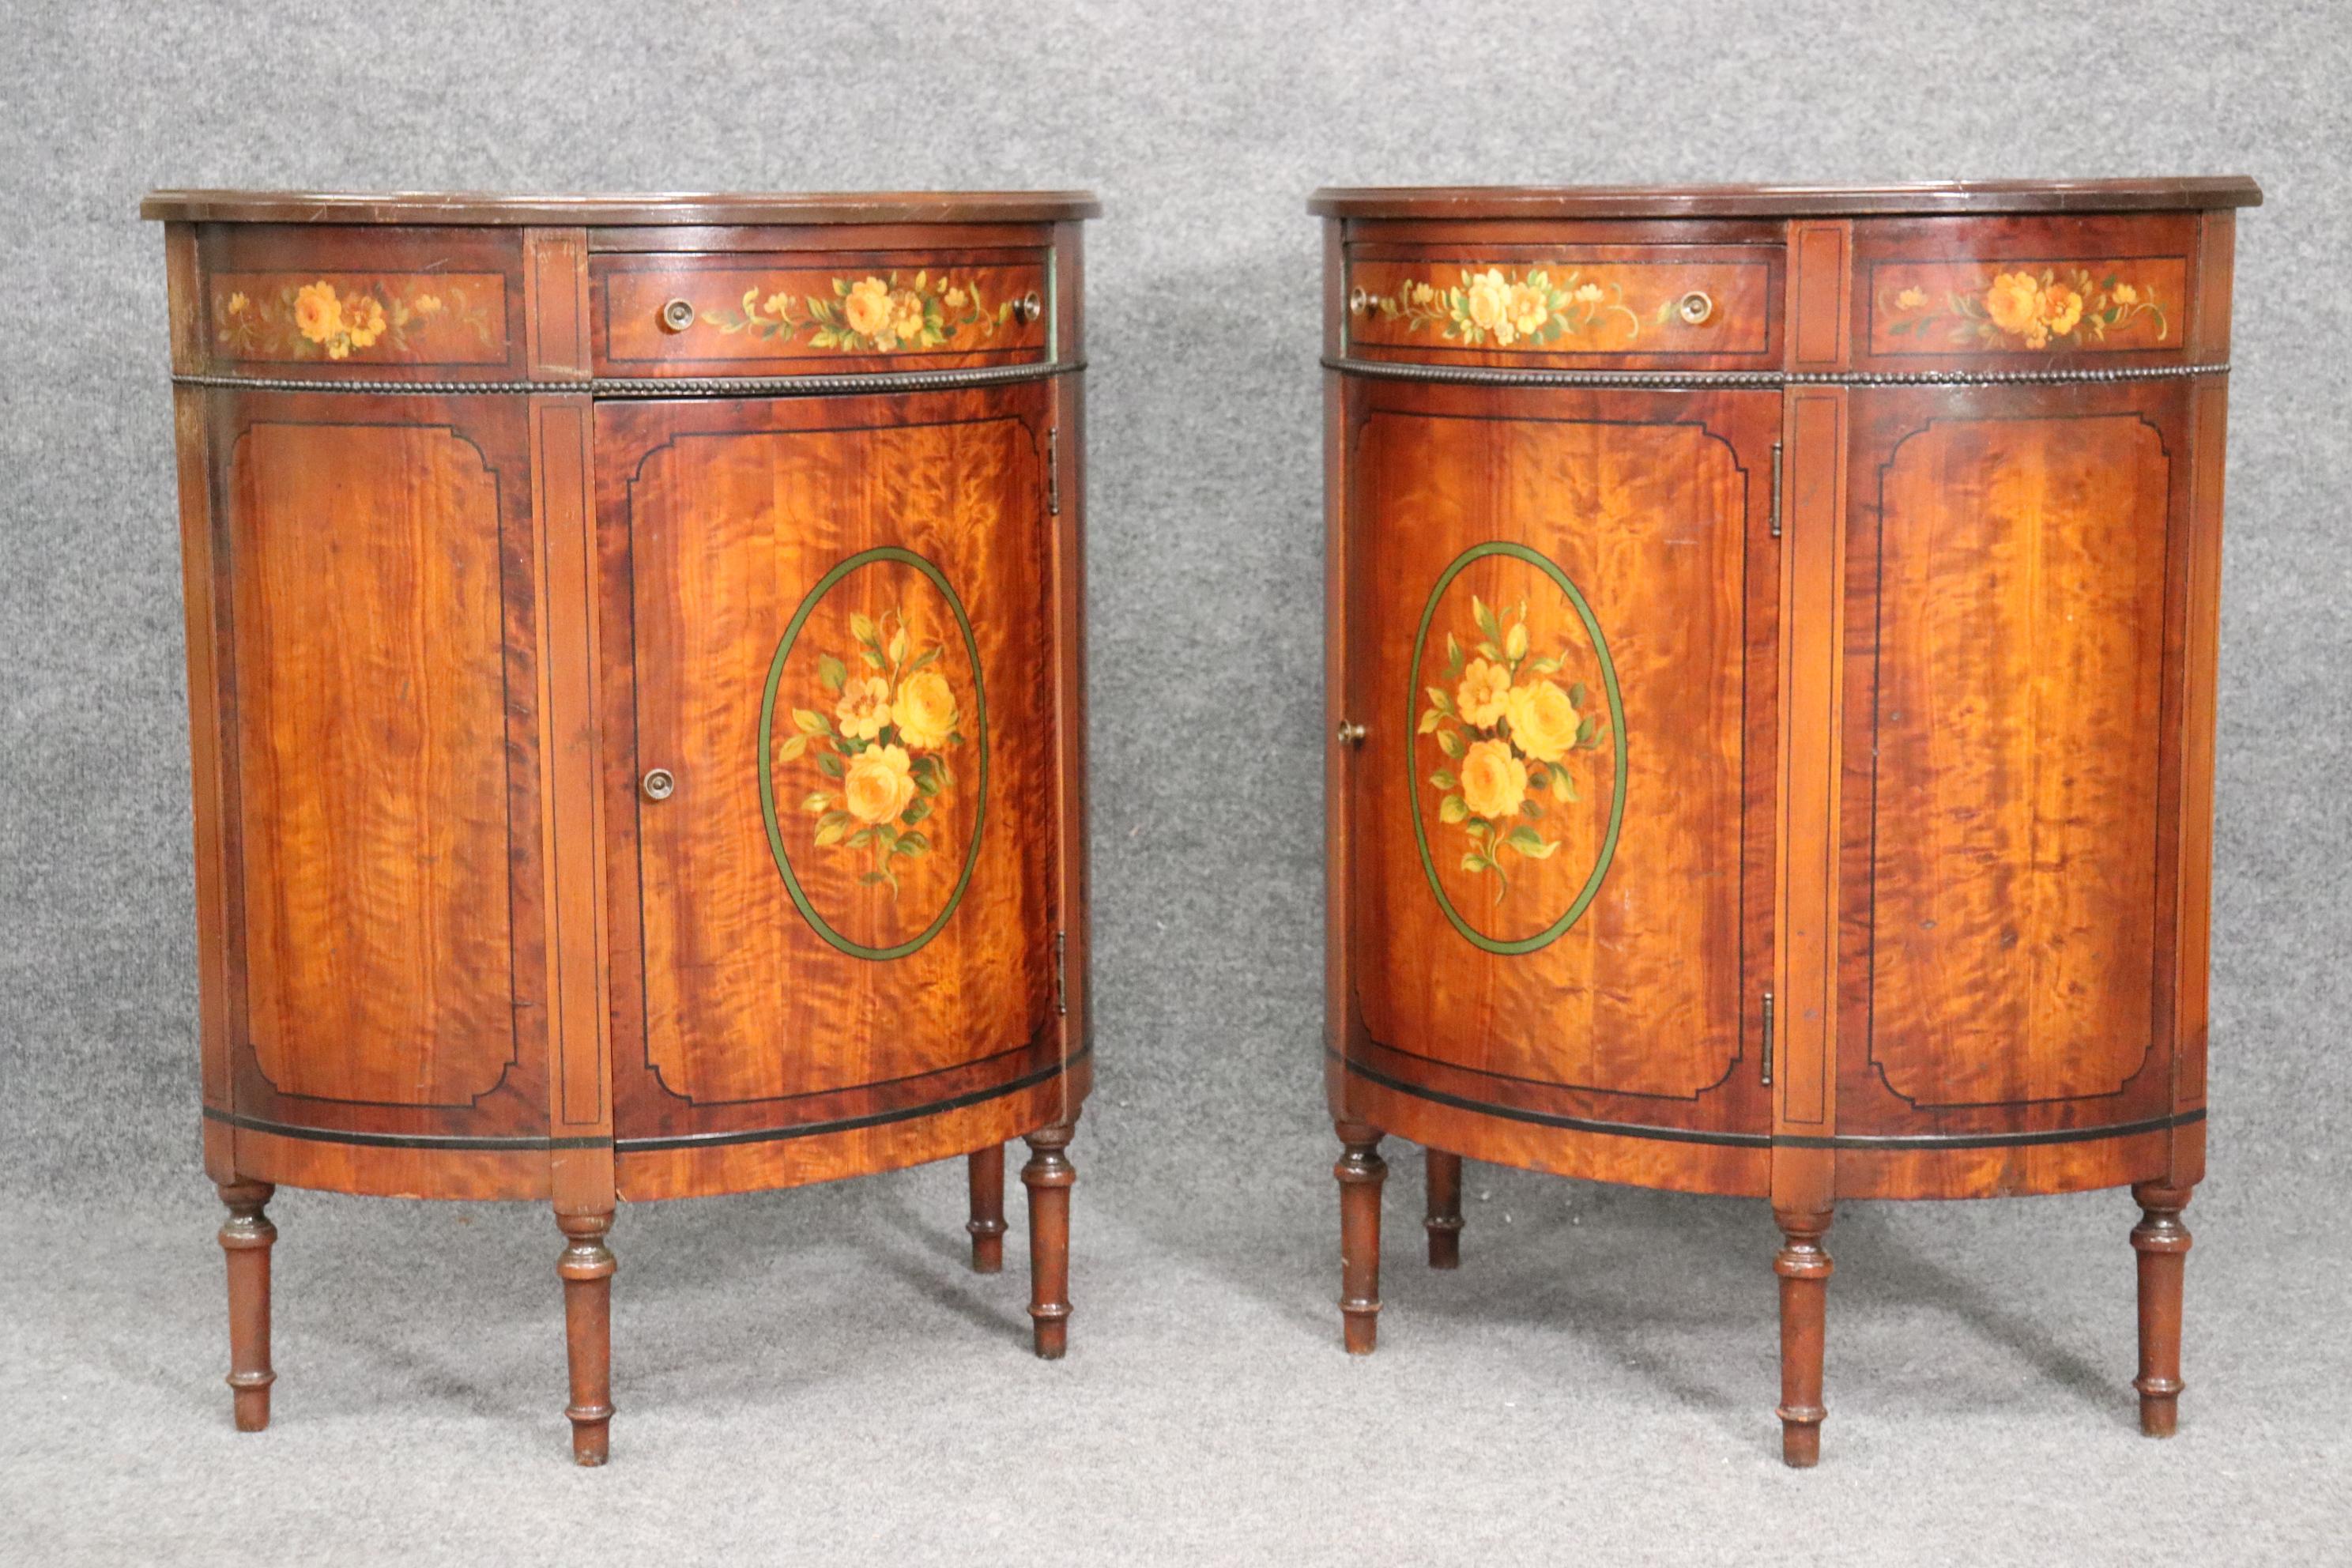 This is a beautiful pair of Adams style commodes or nightstands. They are in good condition and measure 32 tall x 26 wide x 13 deep.